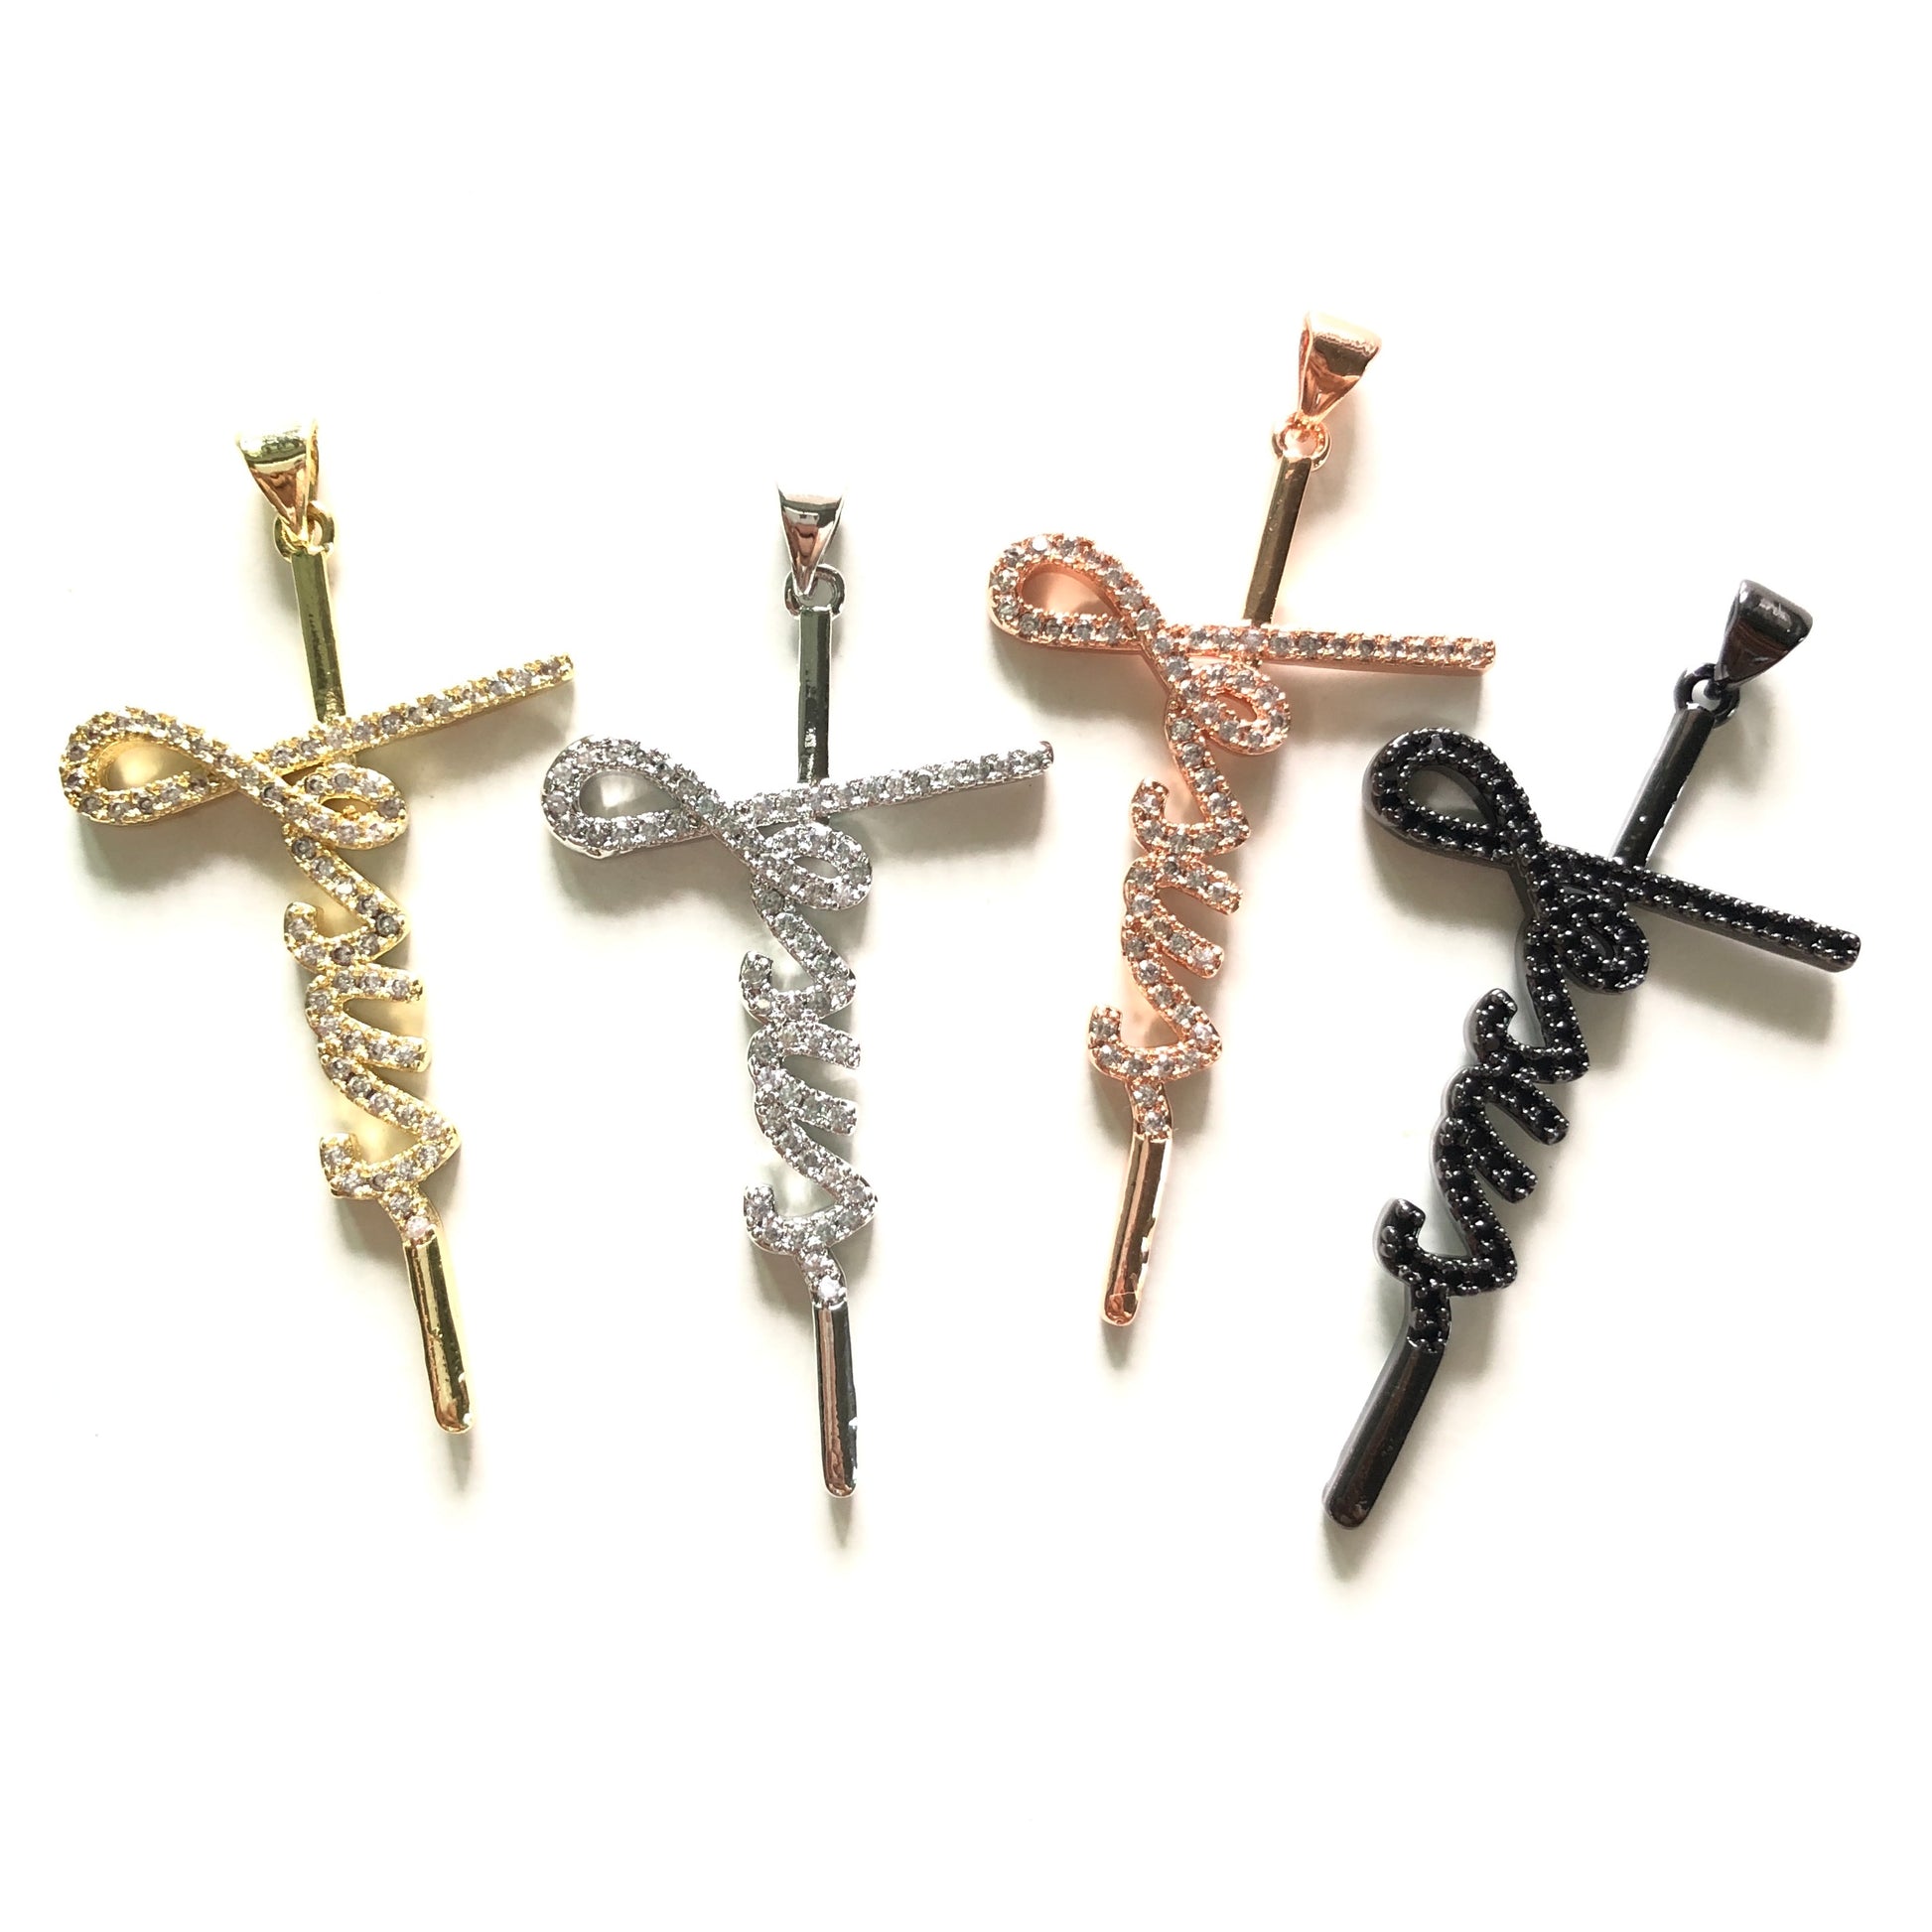 10pcs/lot 45*26.5mm CZ Paved Jesus Cross Charms CZ Paved Charms Christian Quotes Crosses Charms Beads Beyond